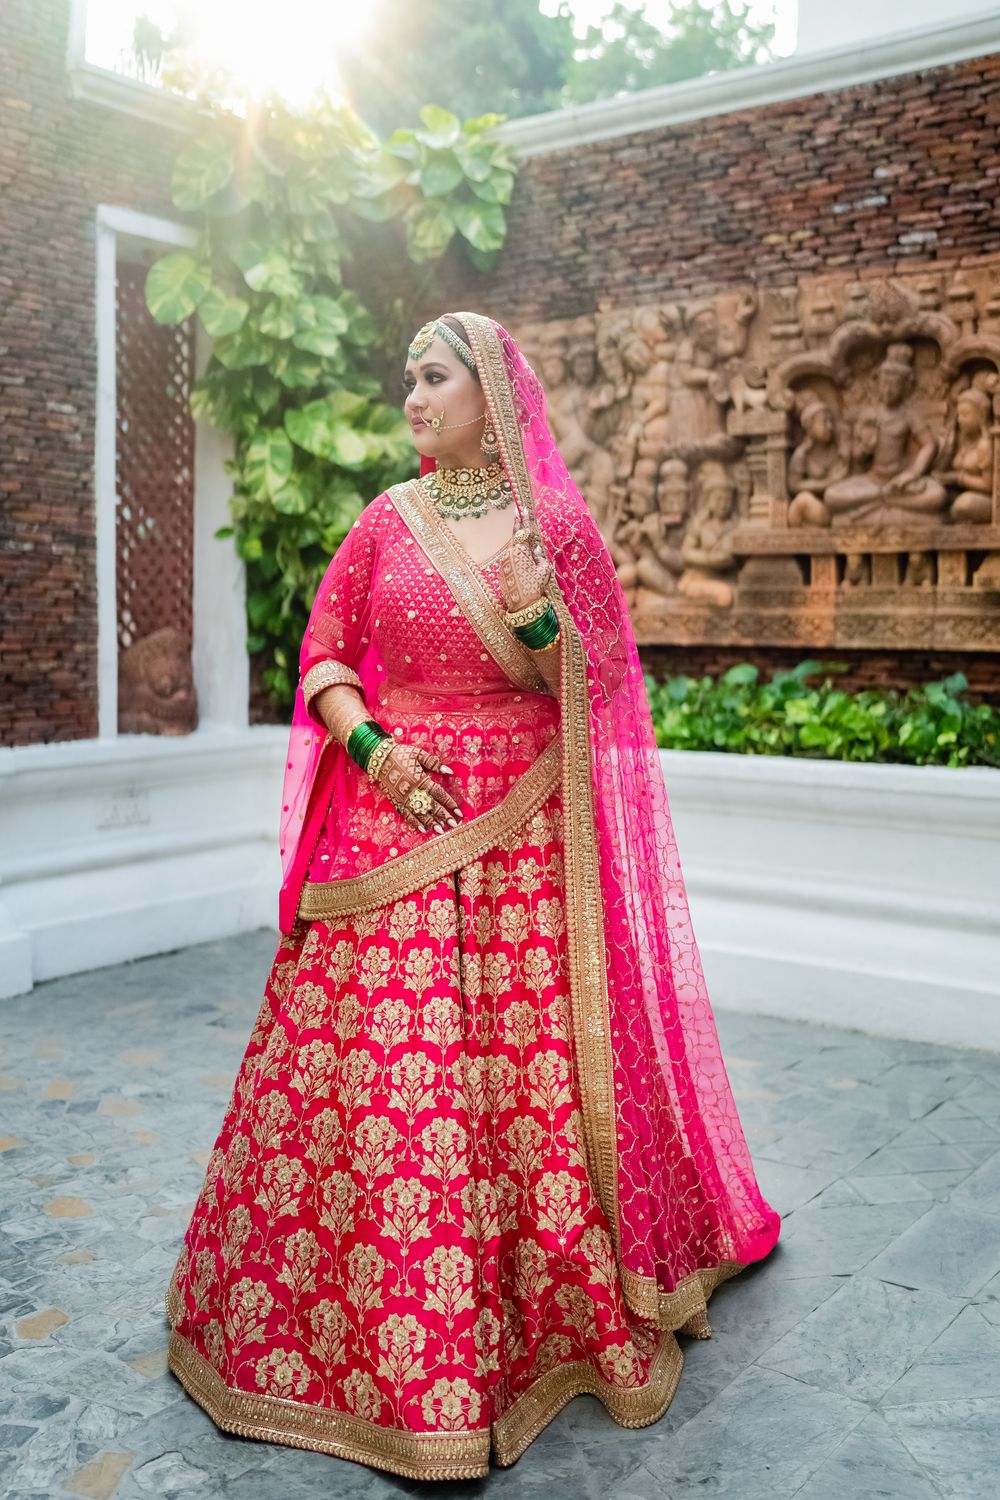 Photo of Bride in a timeless pink wedding lehenga